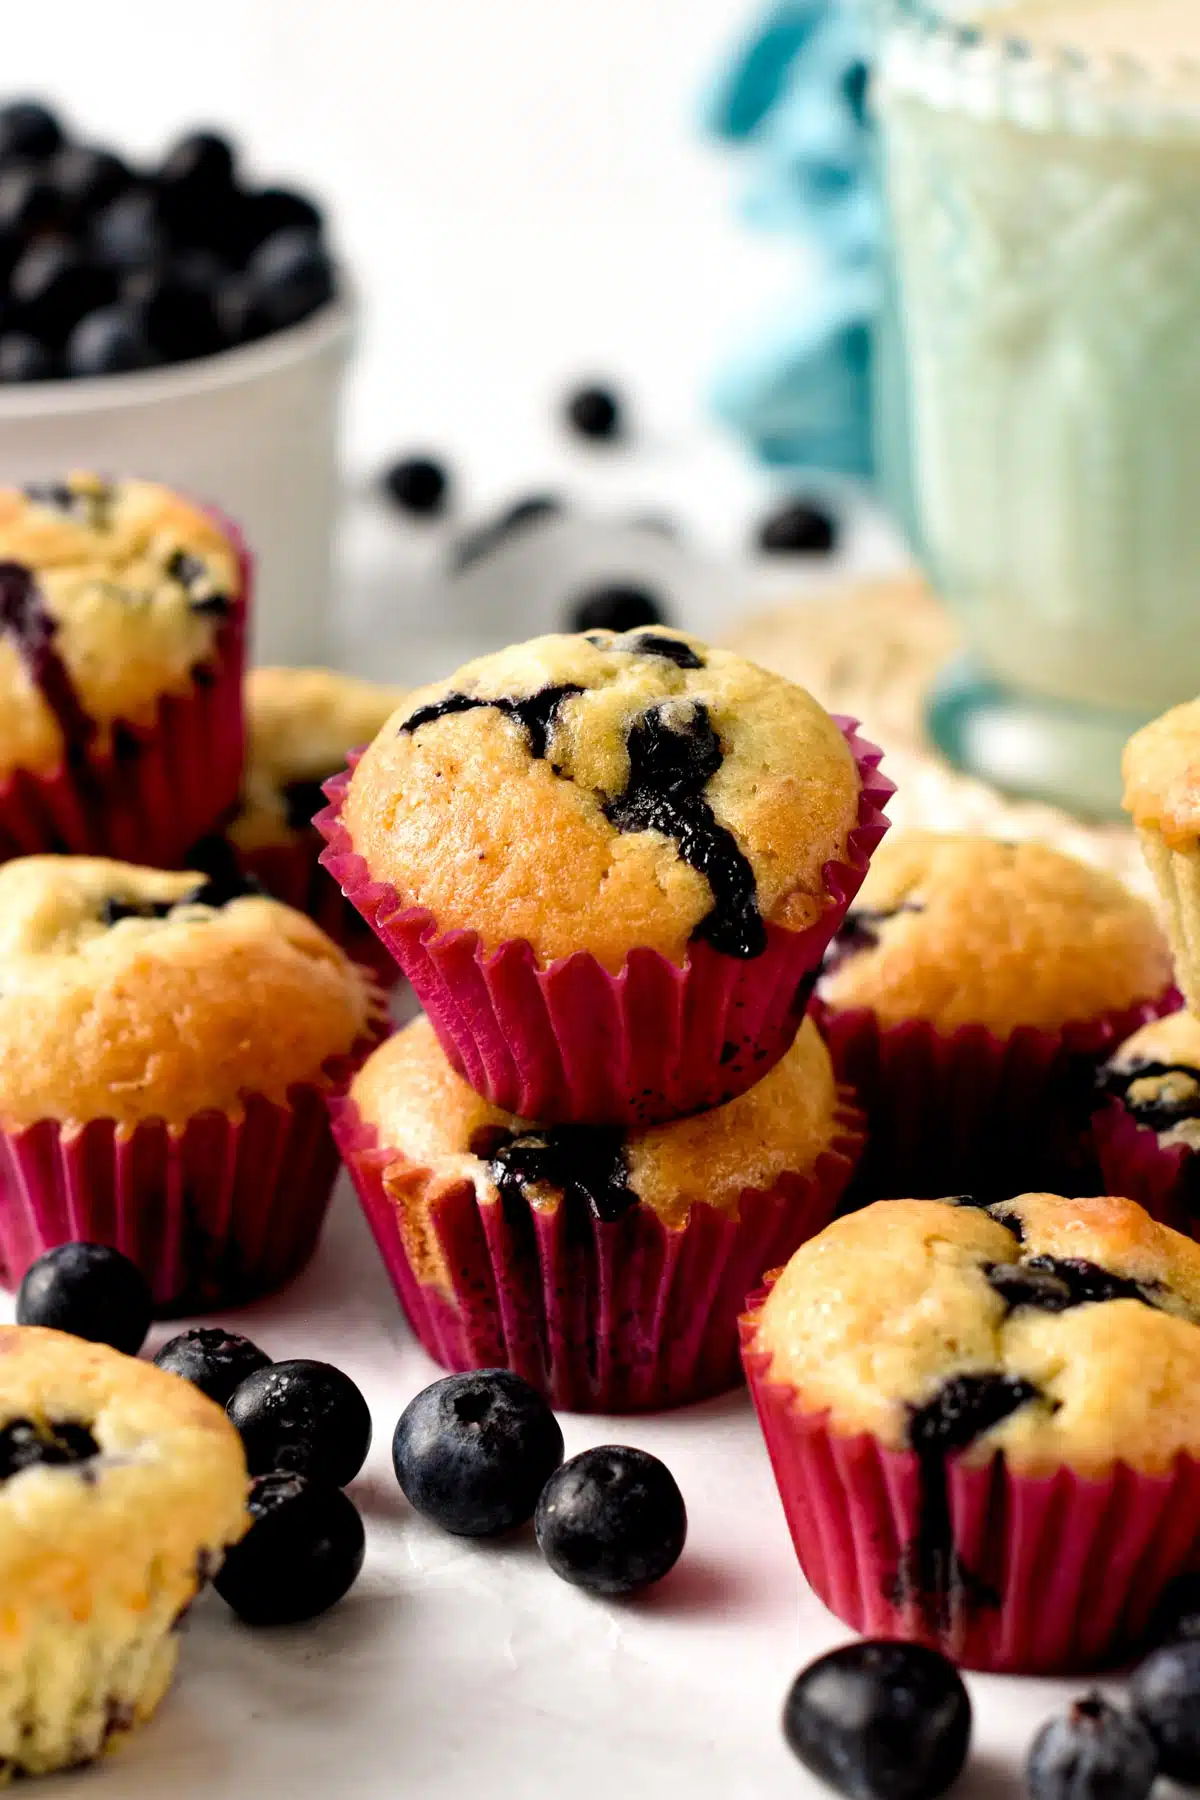 These mini blueberry muffins are tasty small-serve blueberry muffins filled with juicy blueberries and fluffy vanilla crumbs. They are perfect for kids' lunchboxes or small hands.These mini blueberry muffins are tasty small-serve blueberry muffins filled with juicy blueberries and fluffy vanilla crumbs. They are perfect for kids' lunchboxes or small hands.